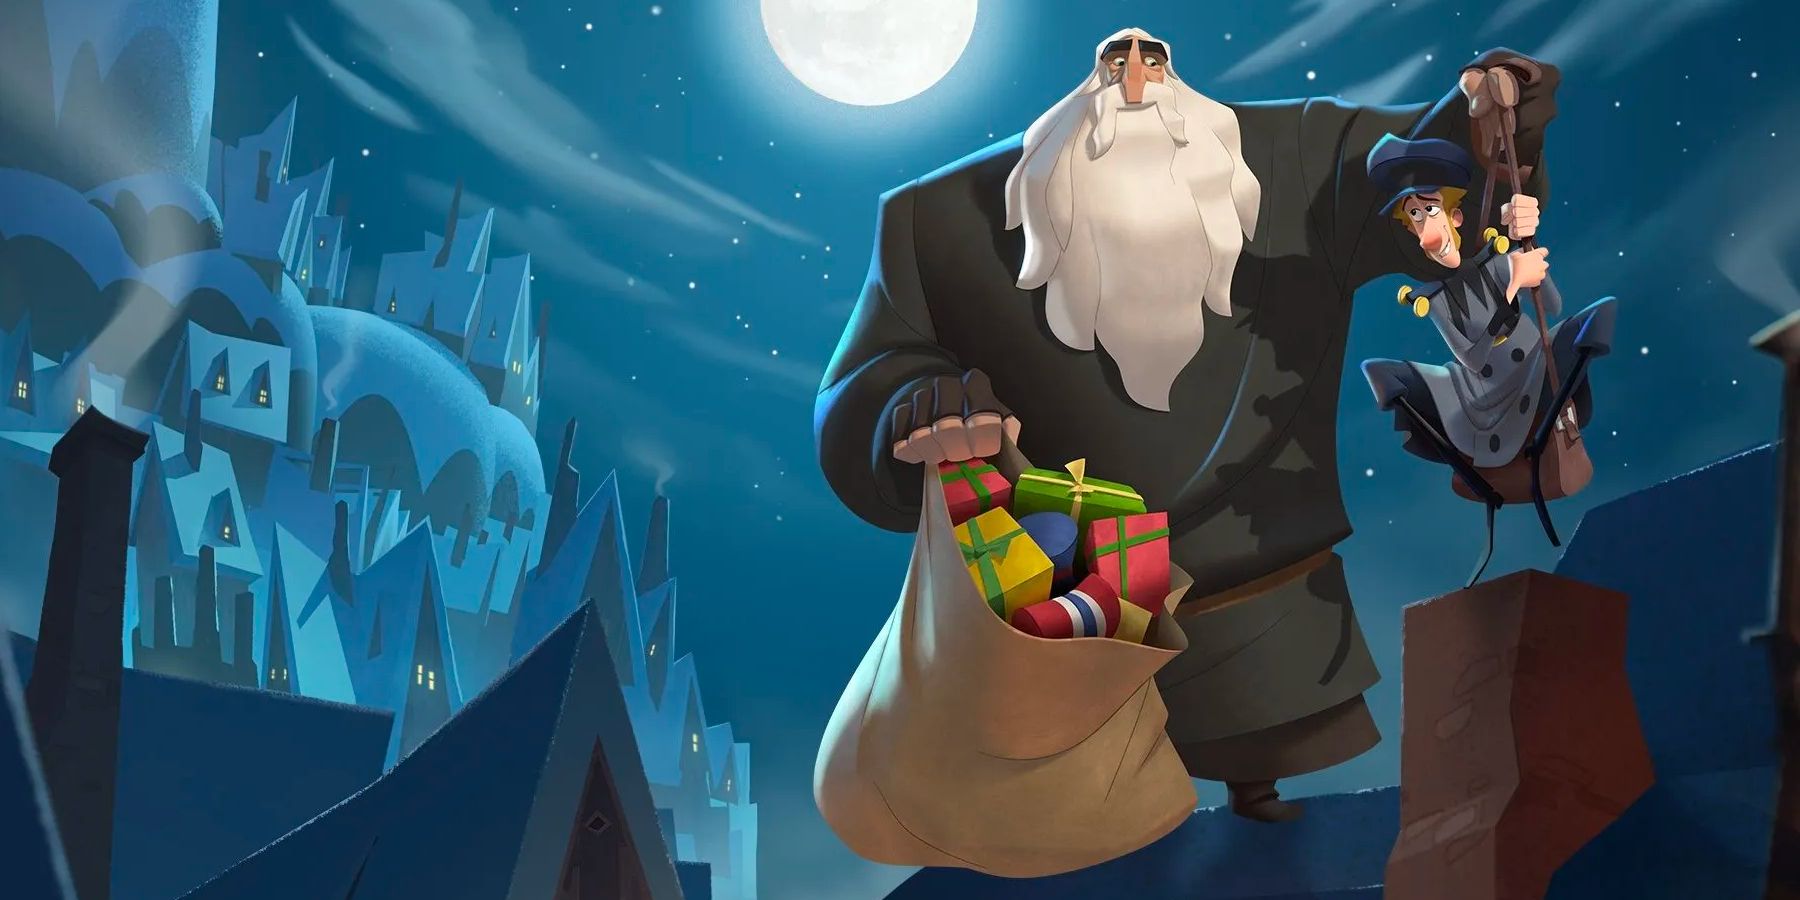 A large, bearded man with a sack of toys helps a postman out of a chimney in 'Klaus'